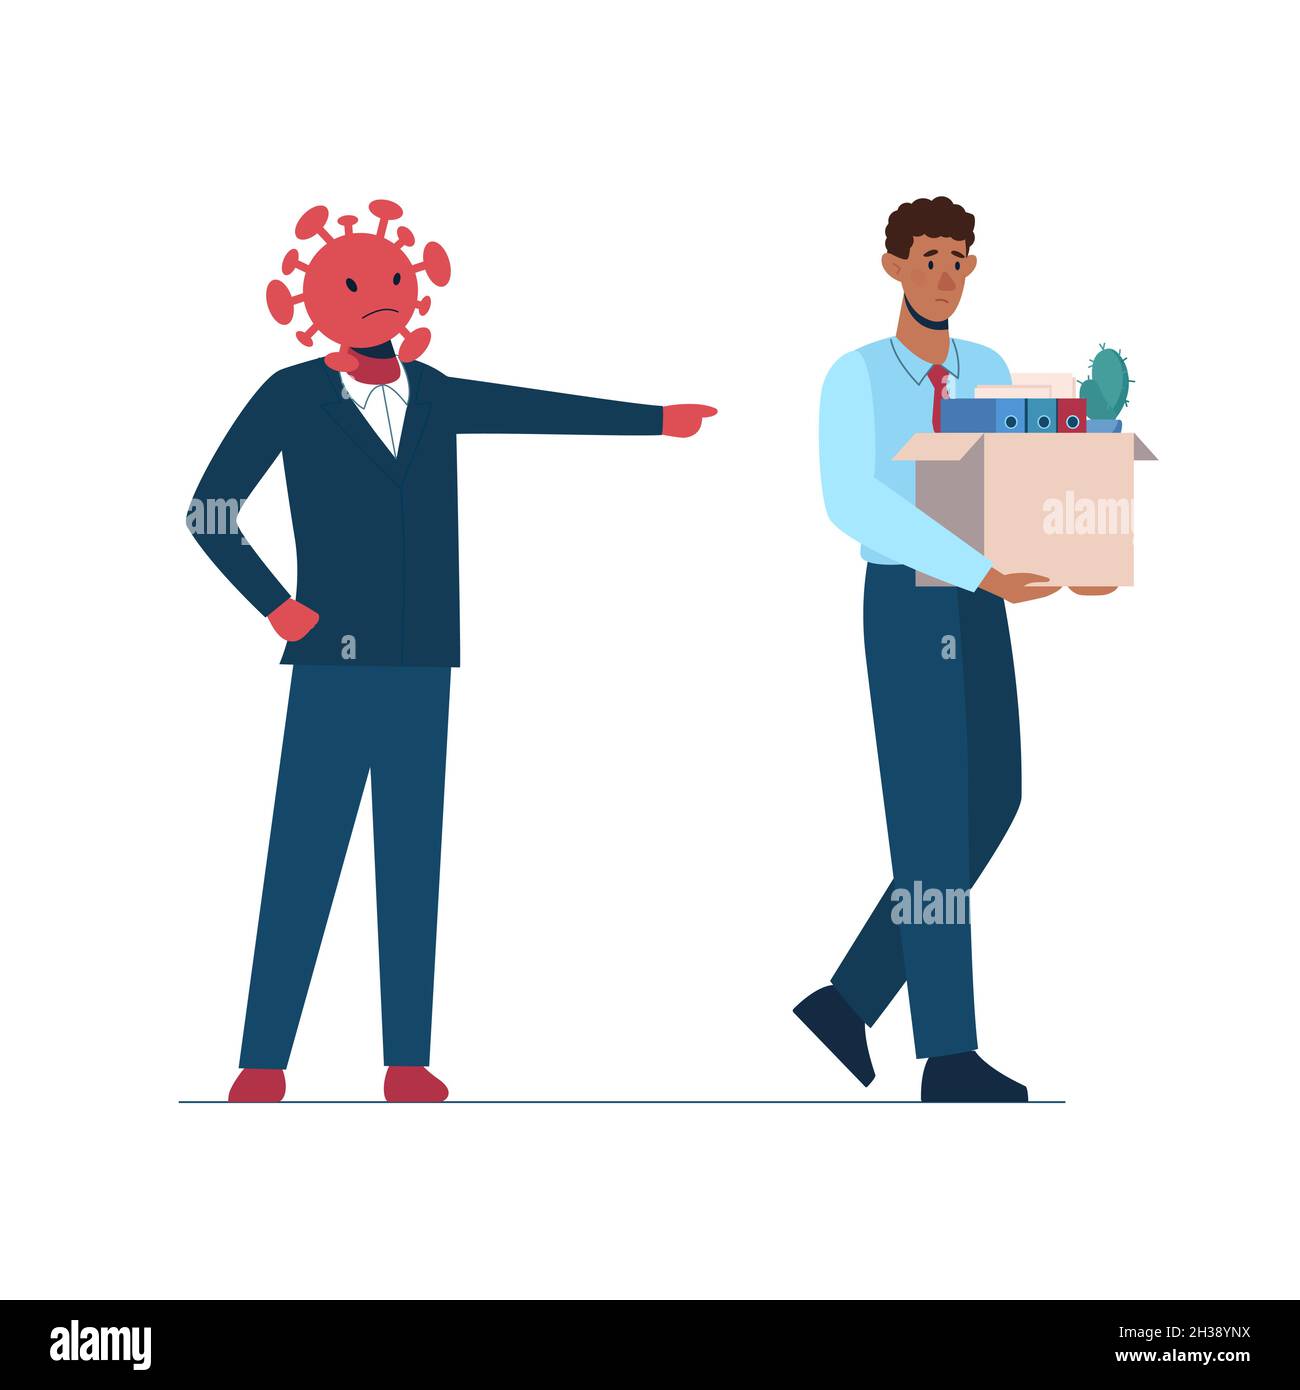 Job loss due to covid-19 virus, economic downturn. The coronavirus leaves people unemployed. A fired African man leave the office with a box in their hands. Dismissed employeest. Vector. Stock Vector